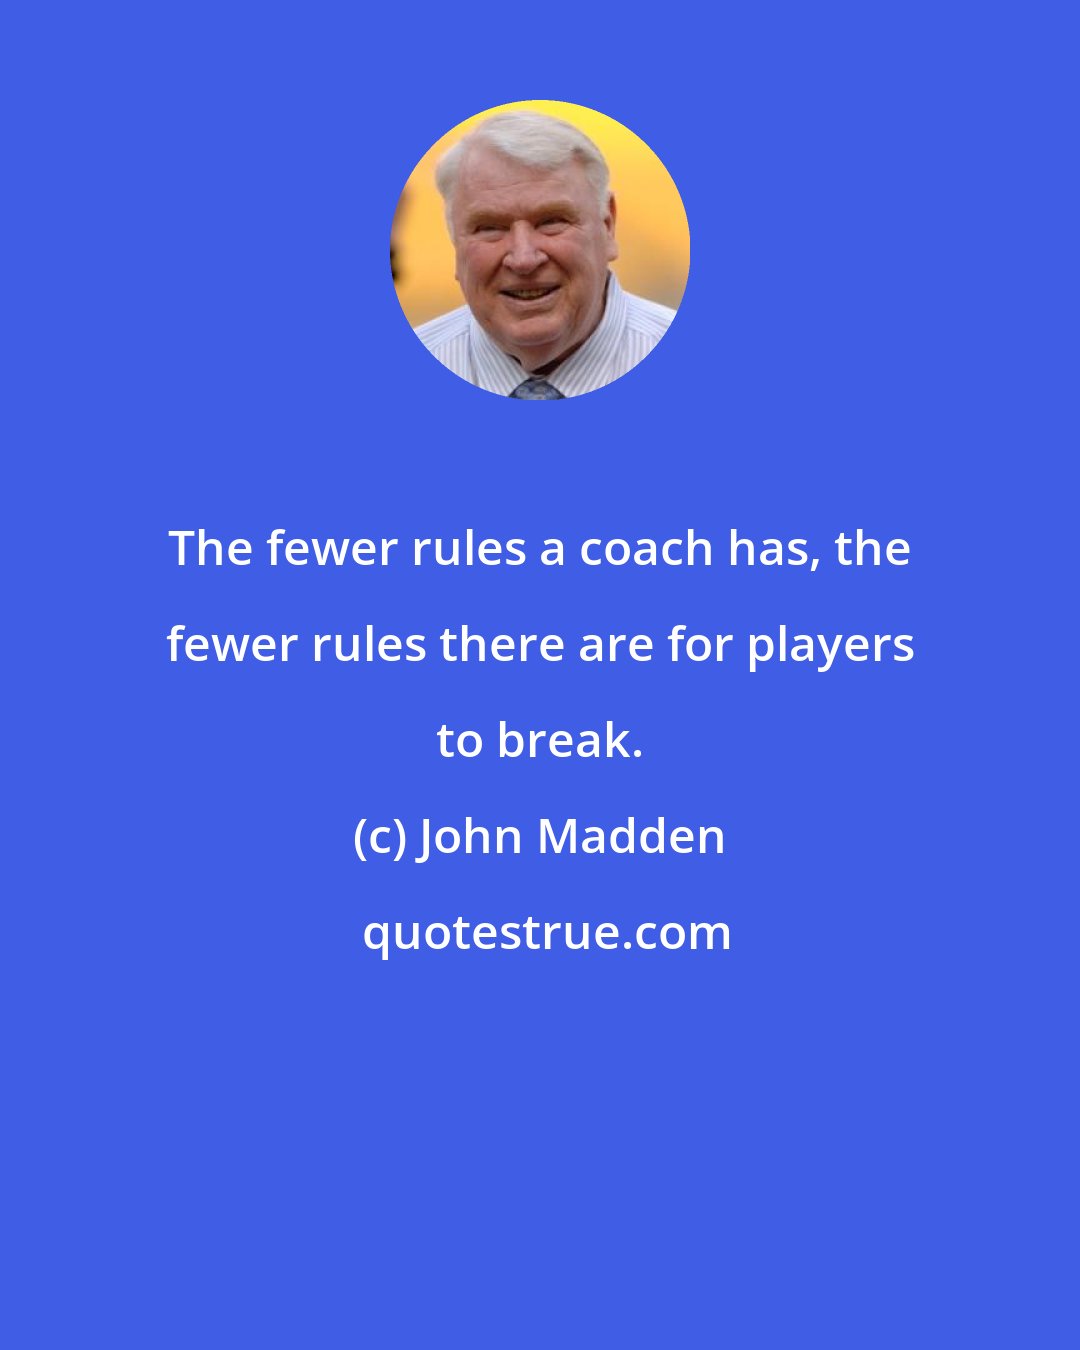 John Madden: The fewer rules a coach has, the fewer rules there are for players to break.